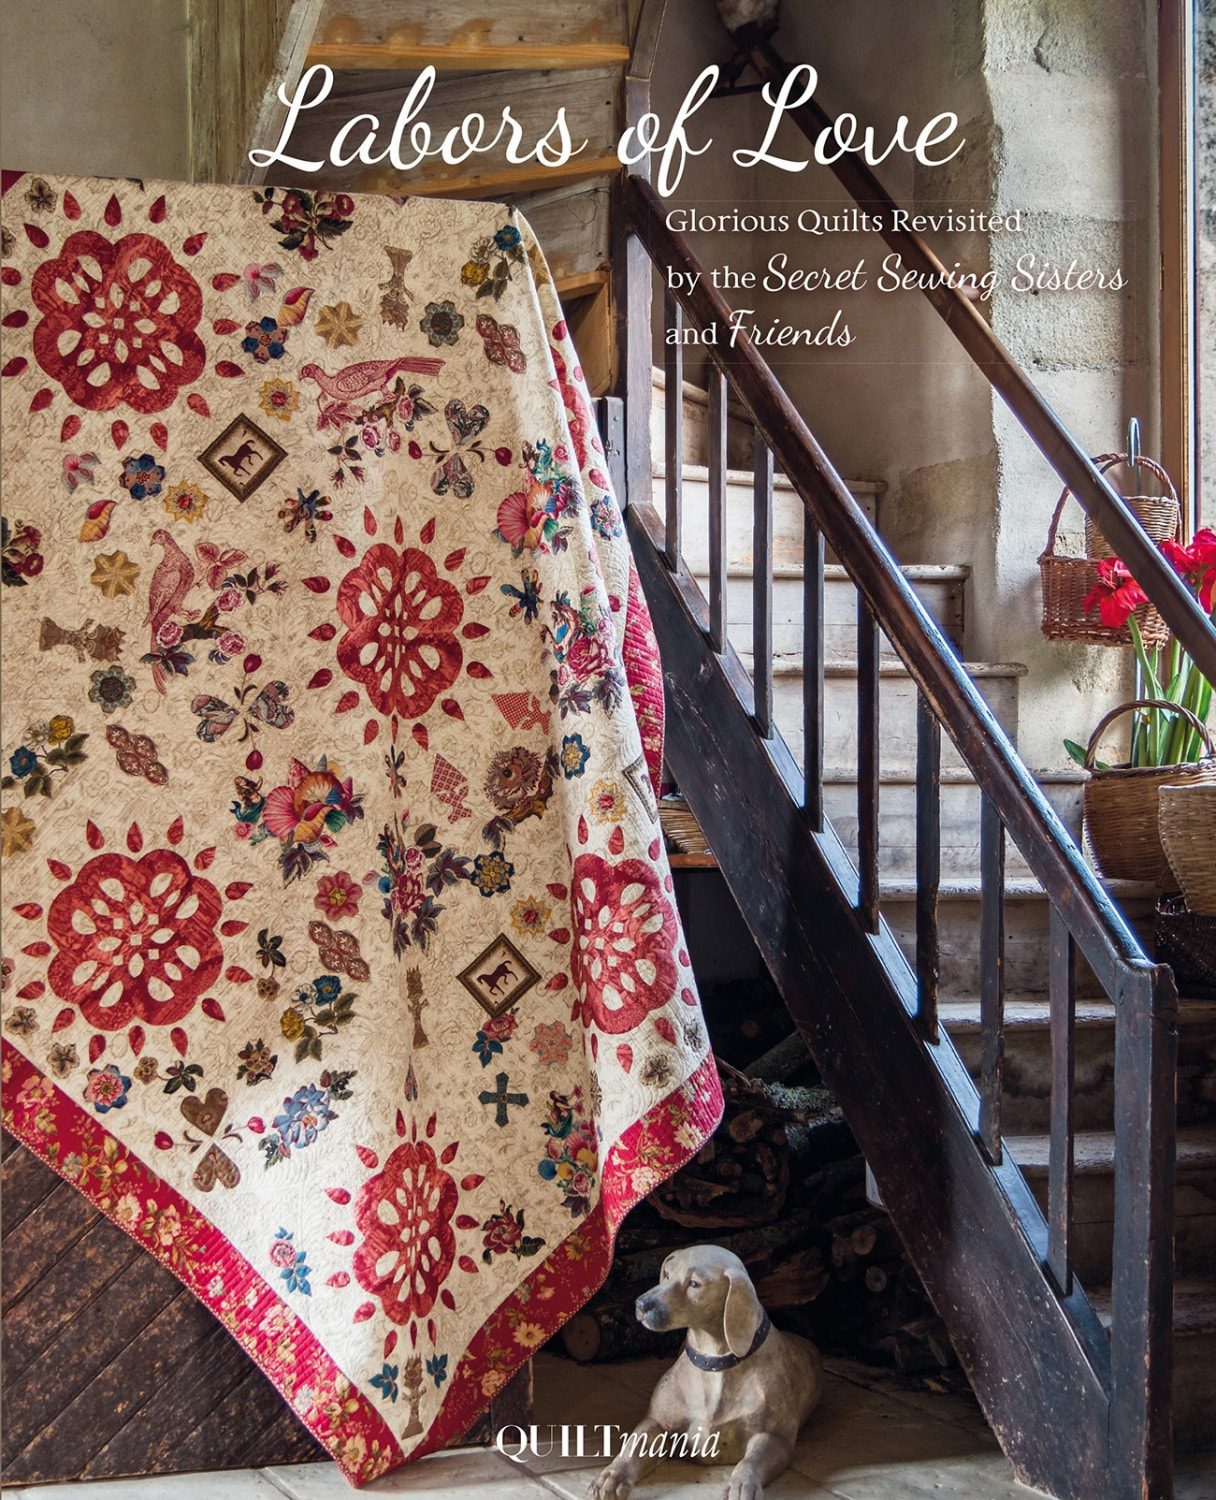 Labors of Love - Glorious Quilts Revisited by the Secret Sewing Sisters and Friends - Book